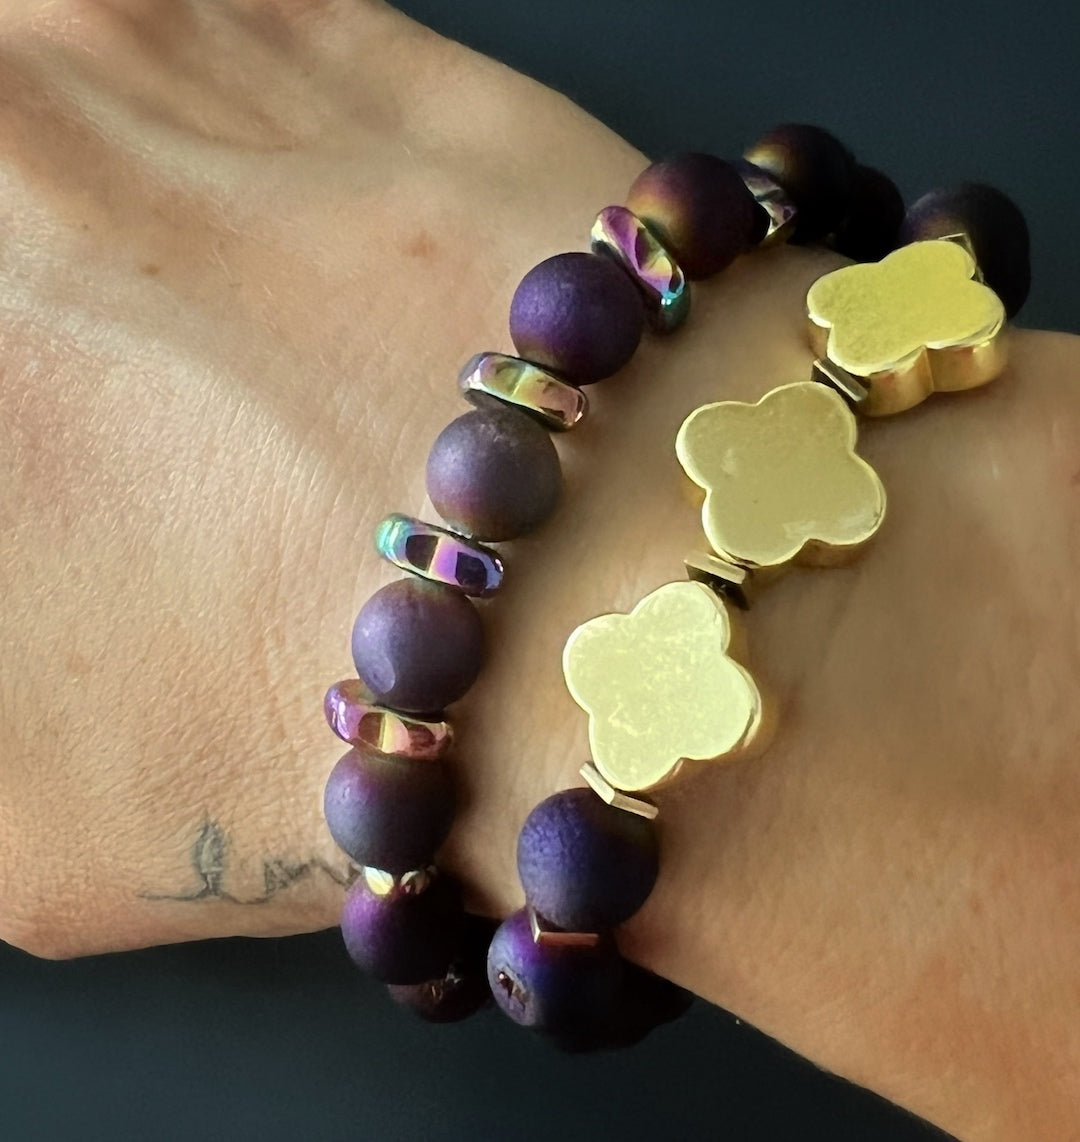 Witness the captivating beauty of the Moroccan Flower Agate Bracelet as the model wears it with confidence, highlighting its versatility and ability to enhance any outfit.